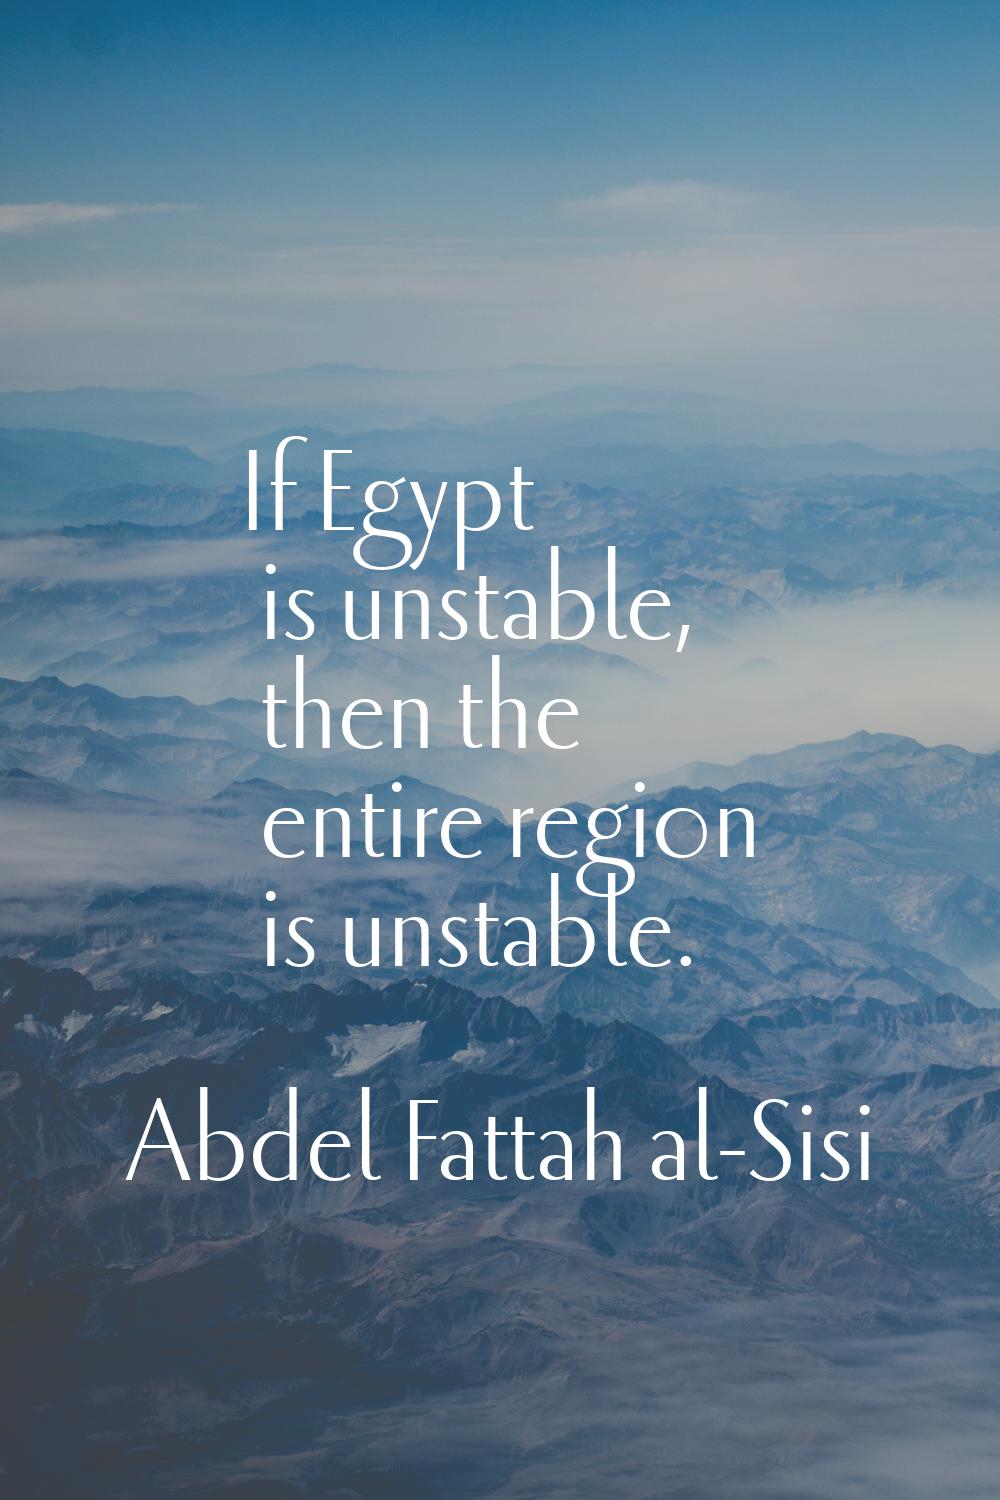 If Egypt is unstable, then the entire region is unstable.